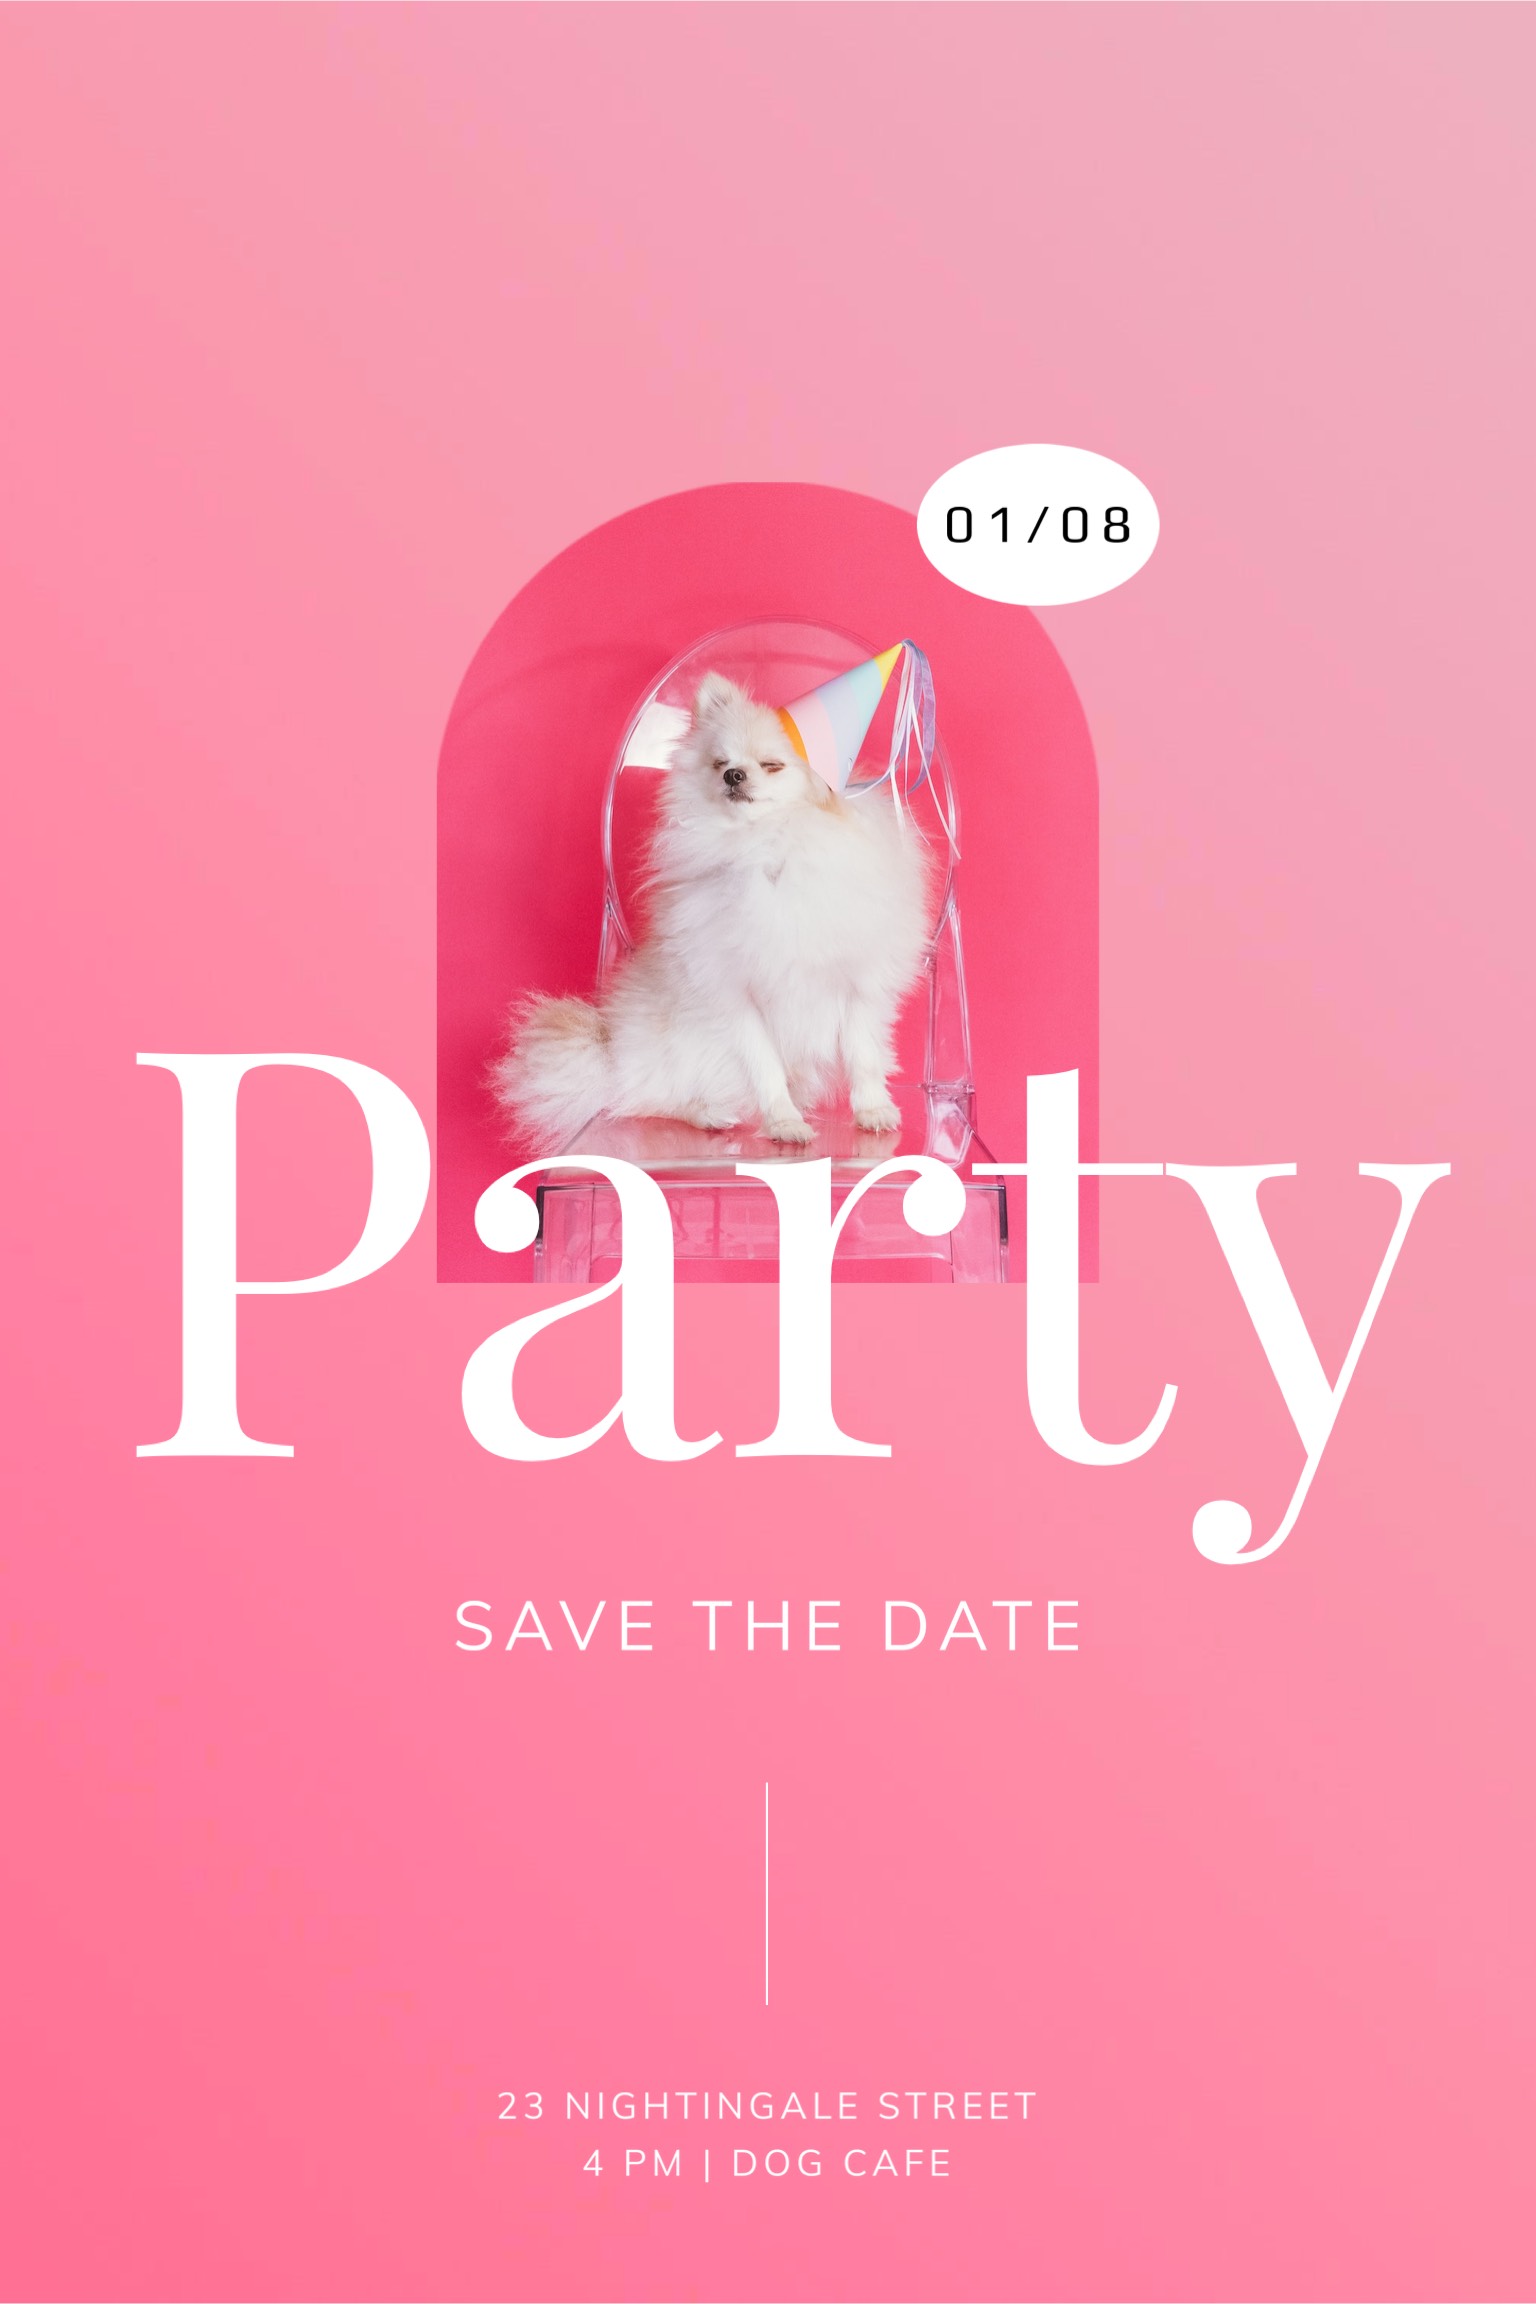 Party save the date pink invitation template